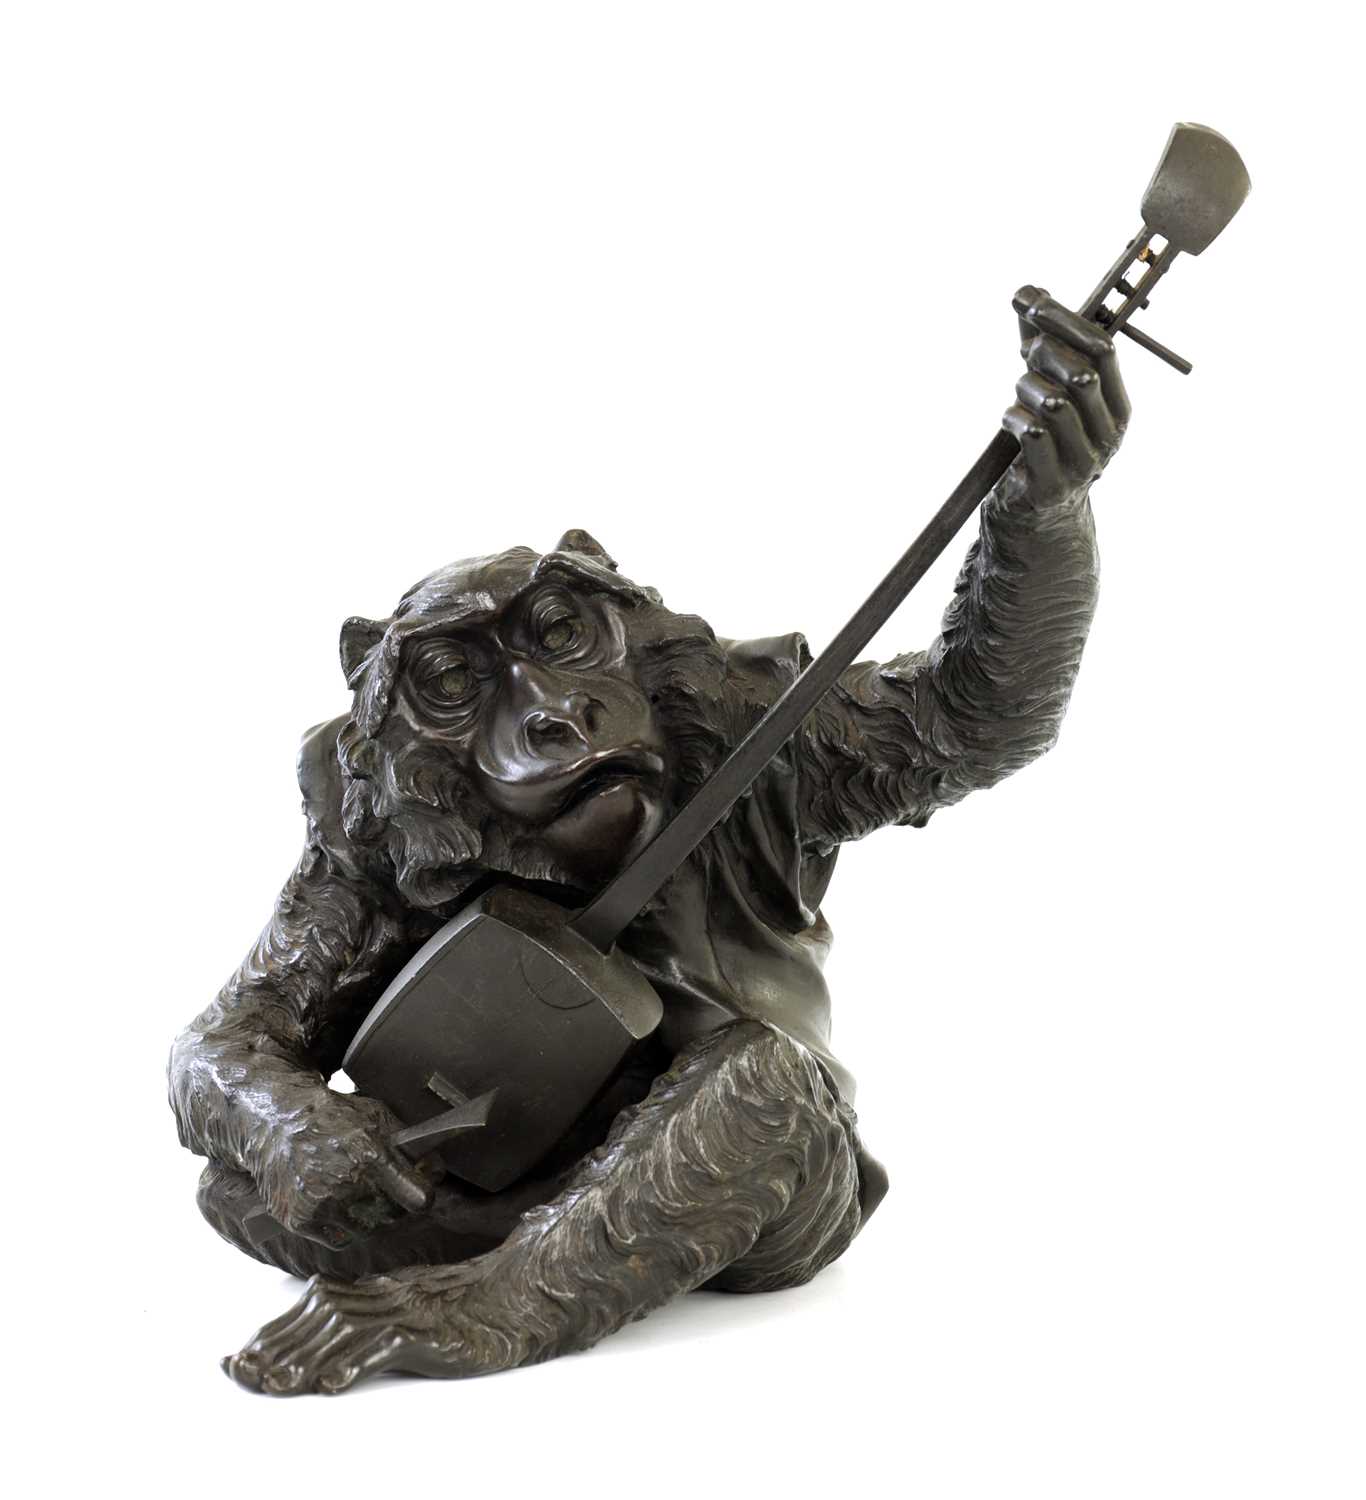 Lot 144 - A LATE 19TH CENTURY JAPANESE MEIJI PERIOD BRONZE SCULPTURE OF A SEATED MONKEY PLAYING A SHAMISEN